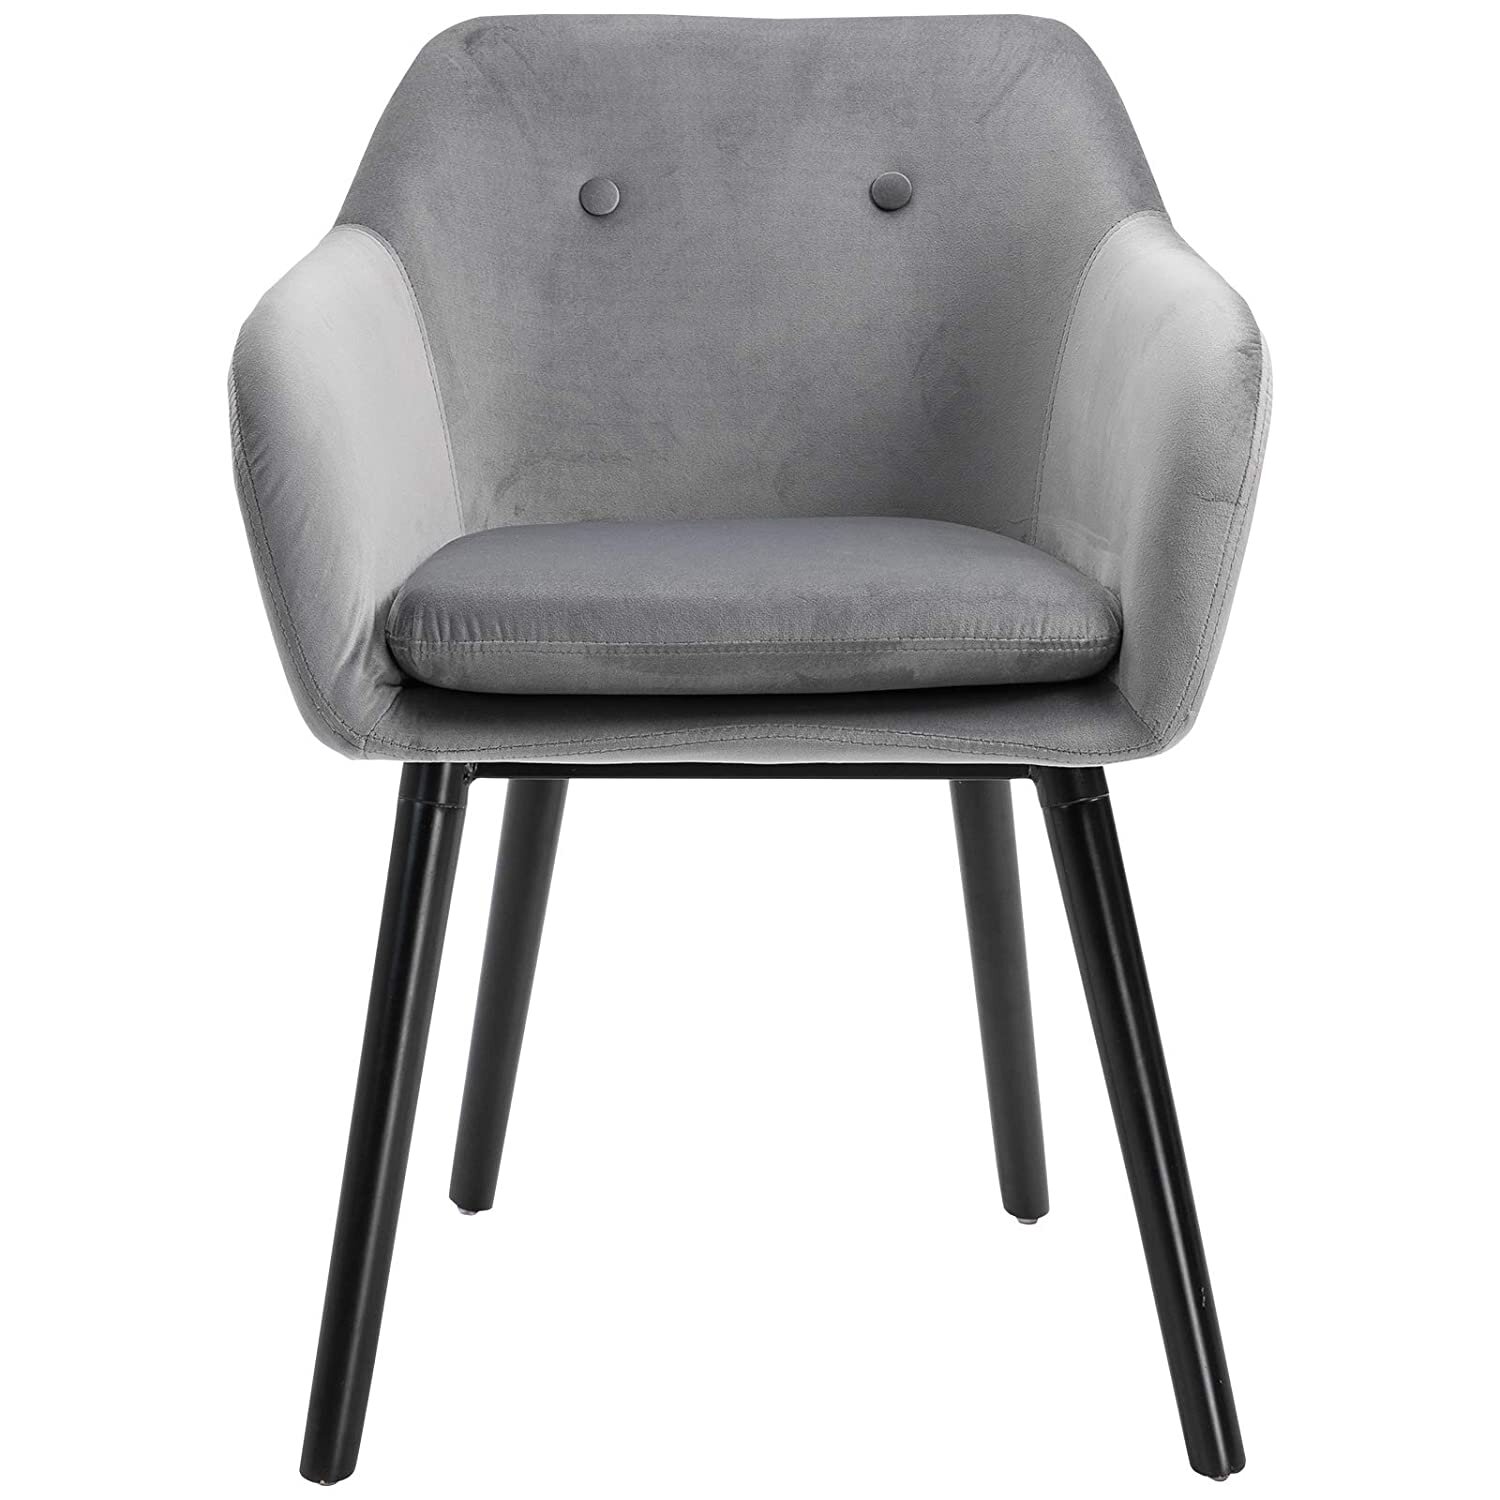 GIZZA Modern Vintage Small Ash Grey Tub Chair with Black Metal Legs Faux Leather Padded Seat for Home Office Bedroom Lounge Arms Occasion Side Chair High Backrest 